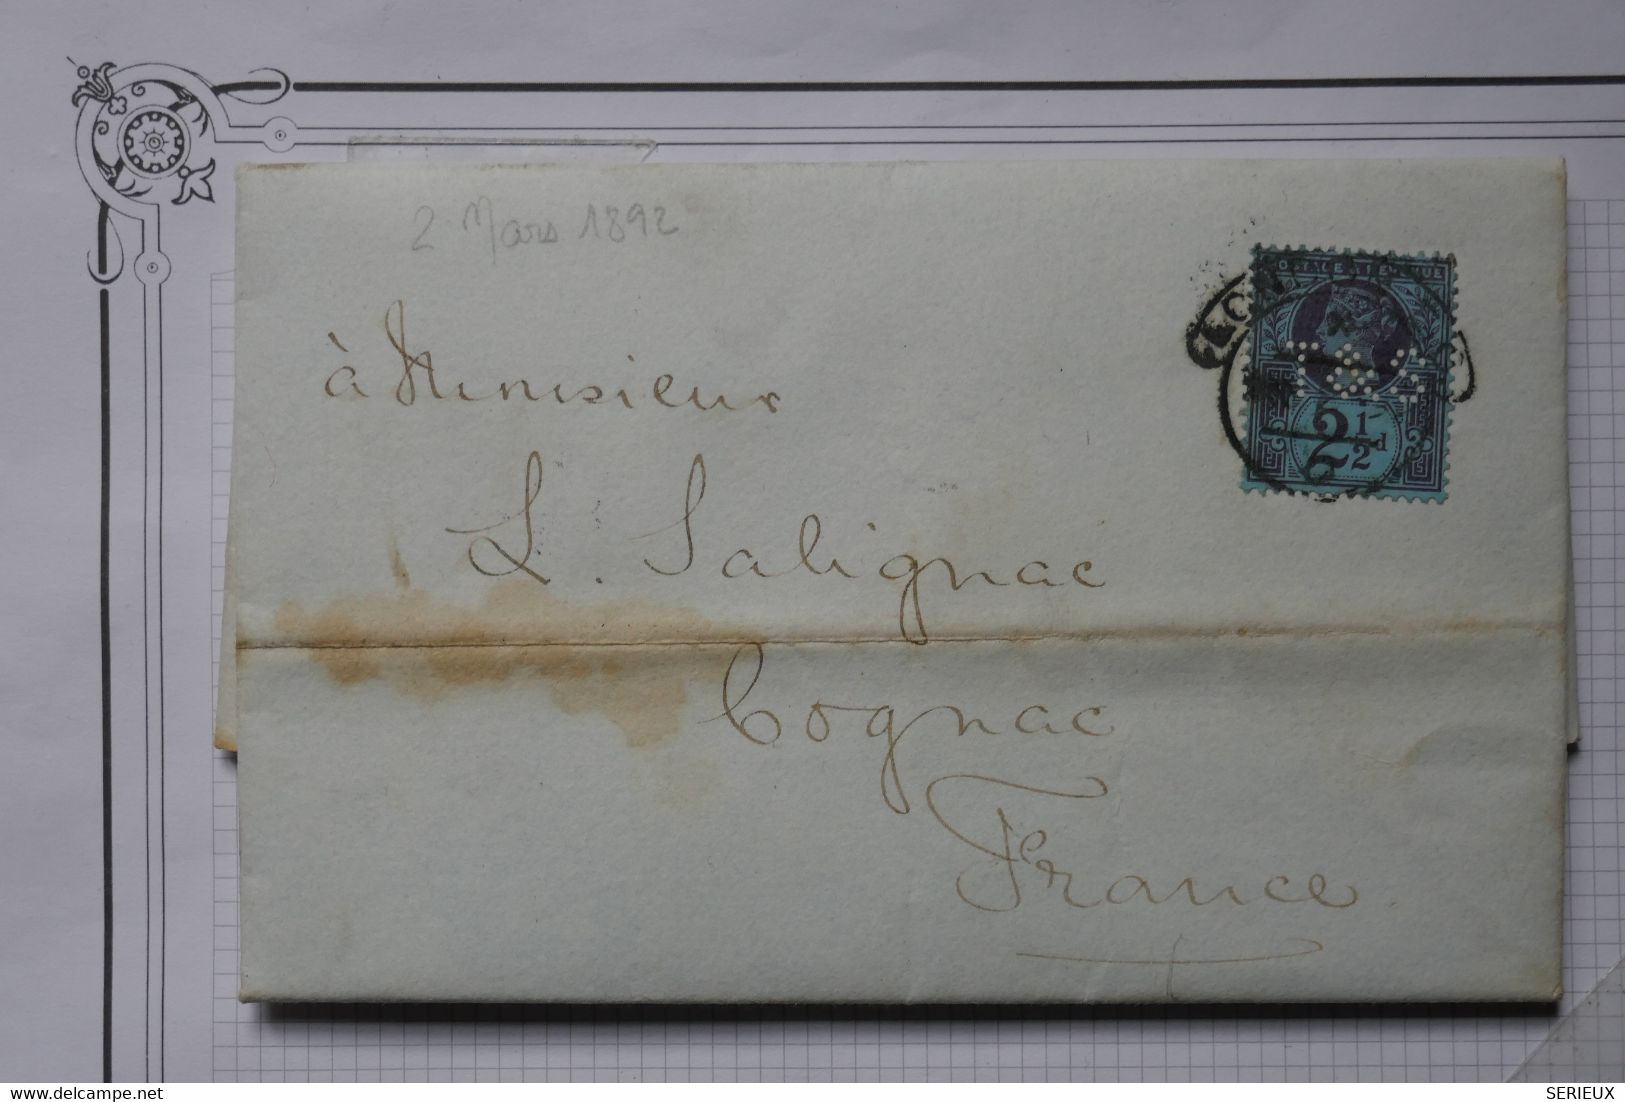 V12 ENGLAND GREAT COVER + PERFIN T S 1892  LONDON   TO COGNAC FRANCE ++2 1\2 PENCE + AFFRANCH. PLAISANT - Covers & Documents